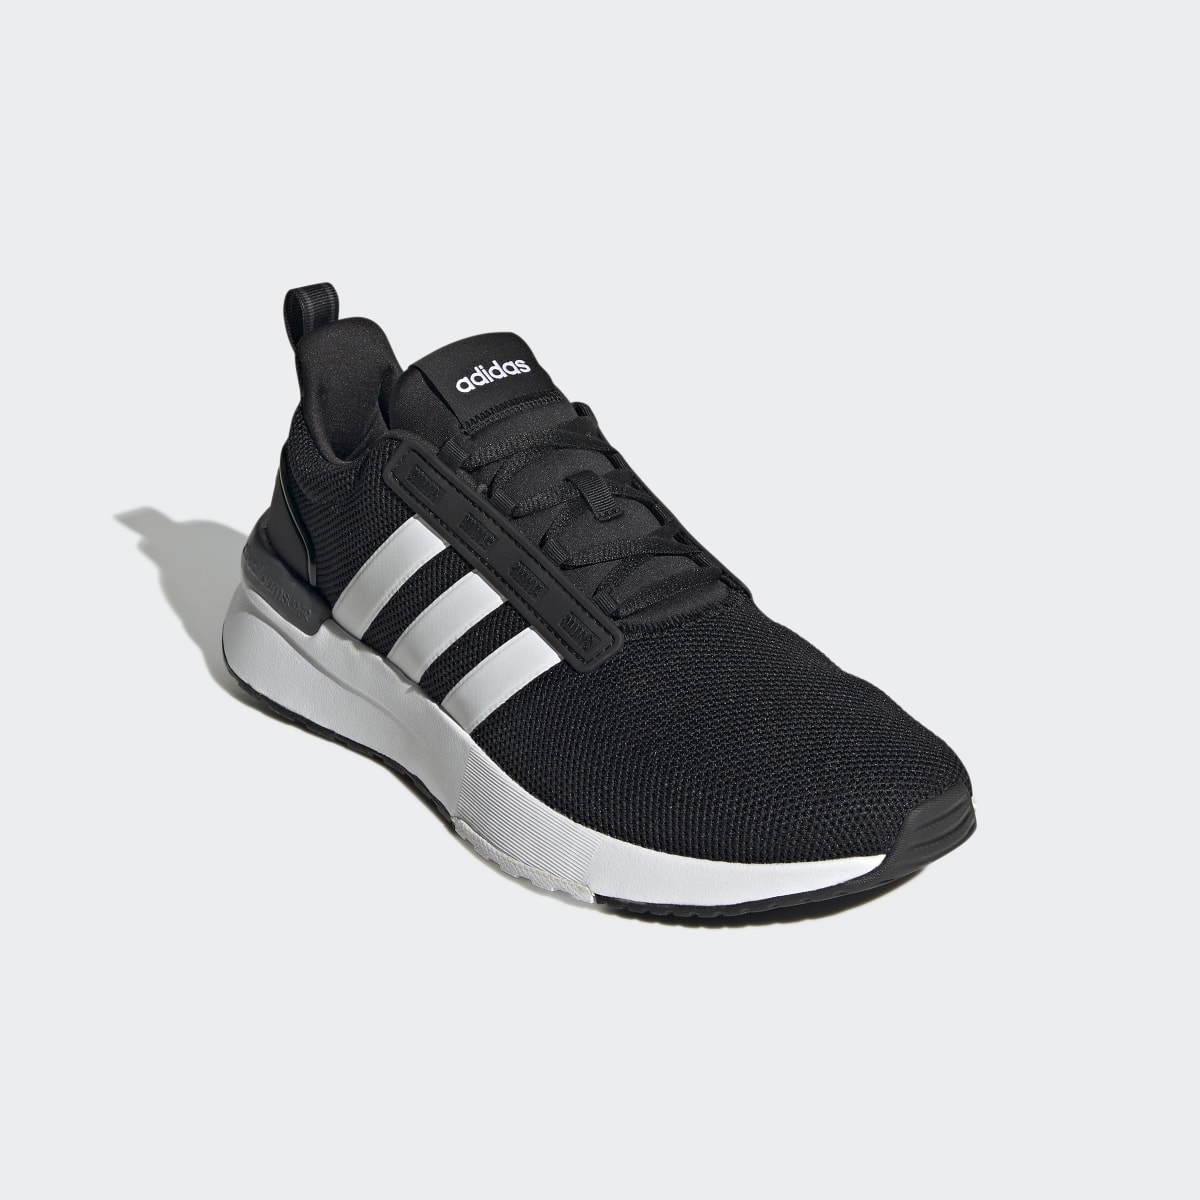 Adidas Racer TR21 Wide Shoes. 5